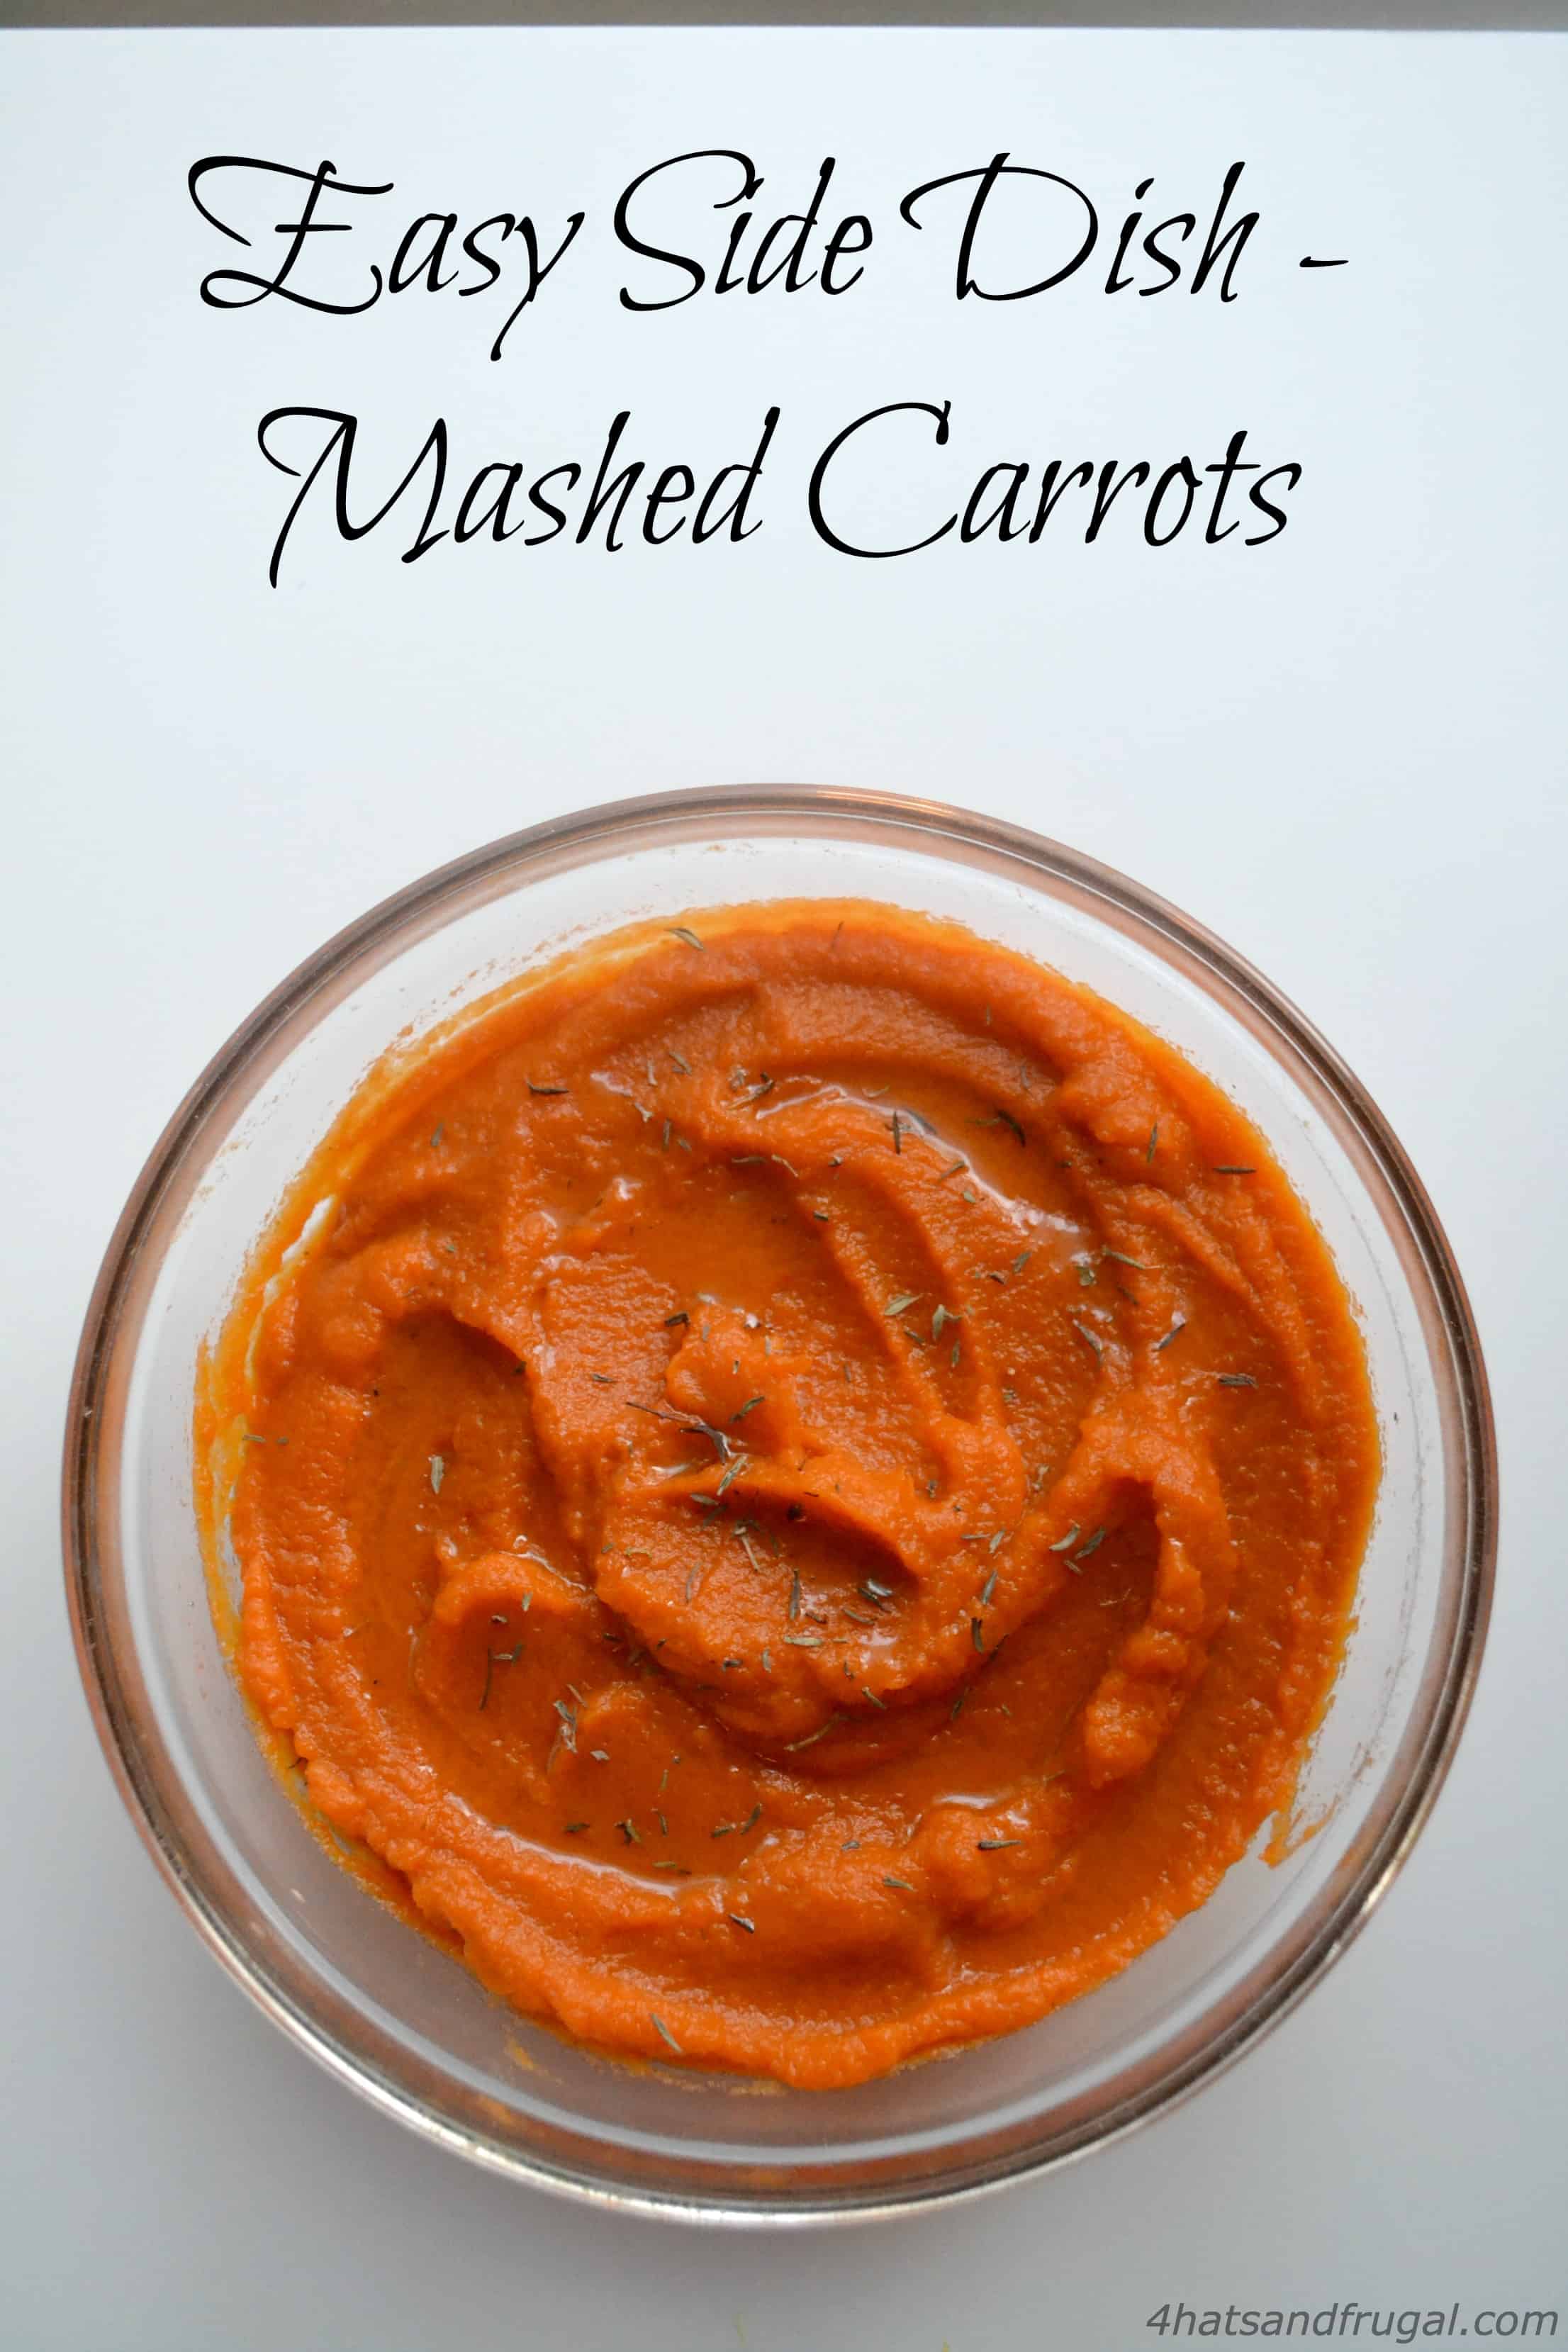 This simple side dish for mashed carrots is perfect for the whole family.